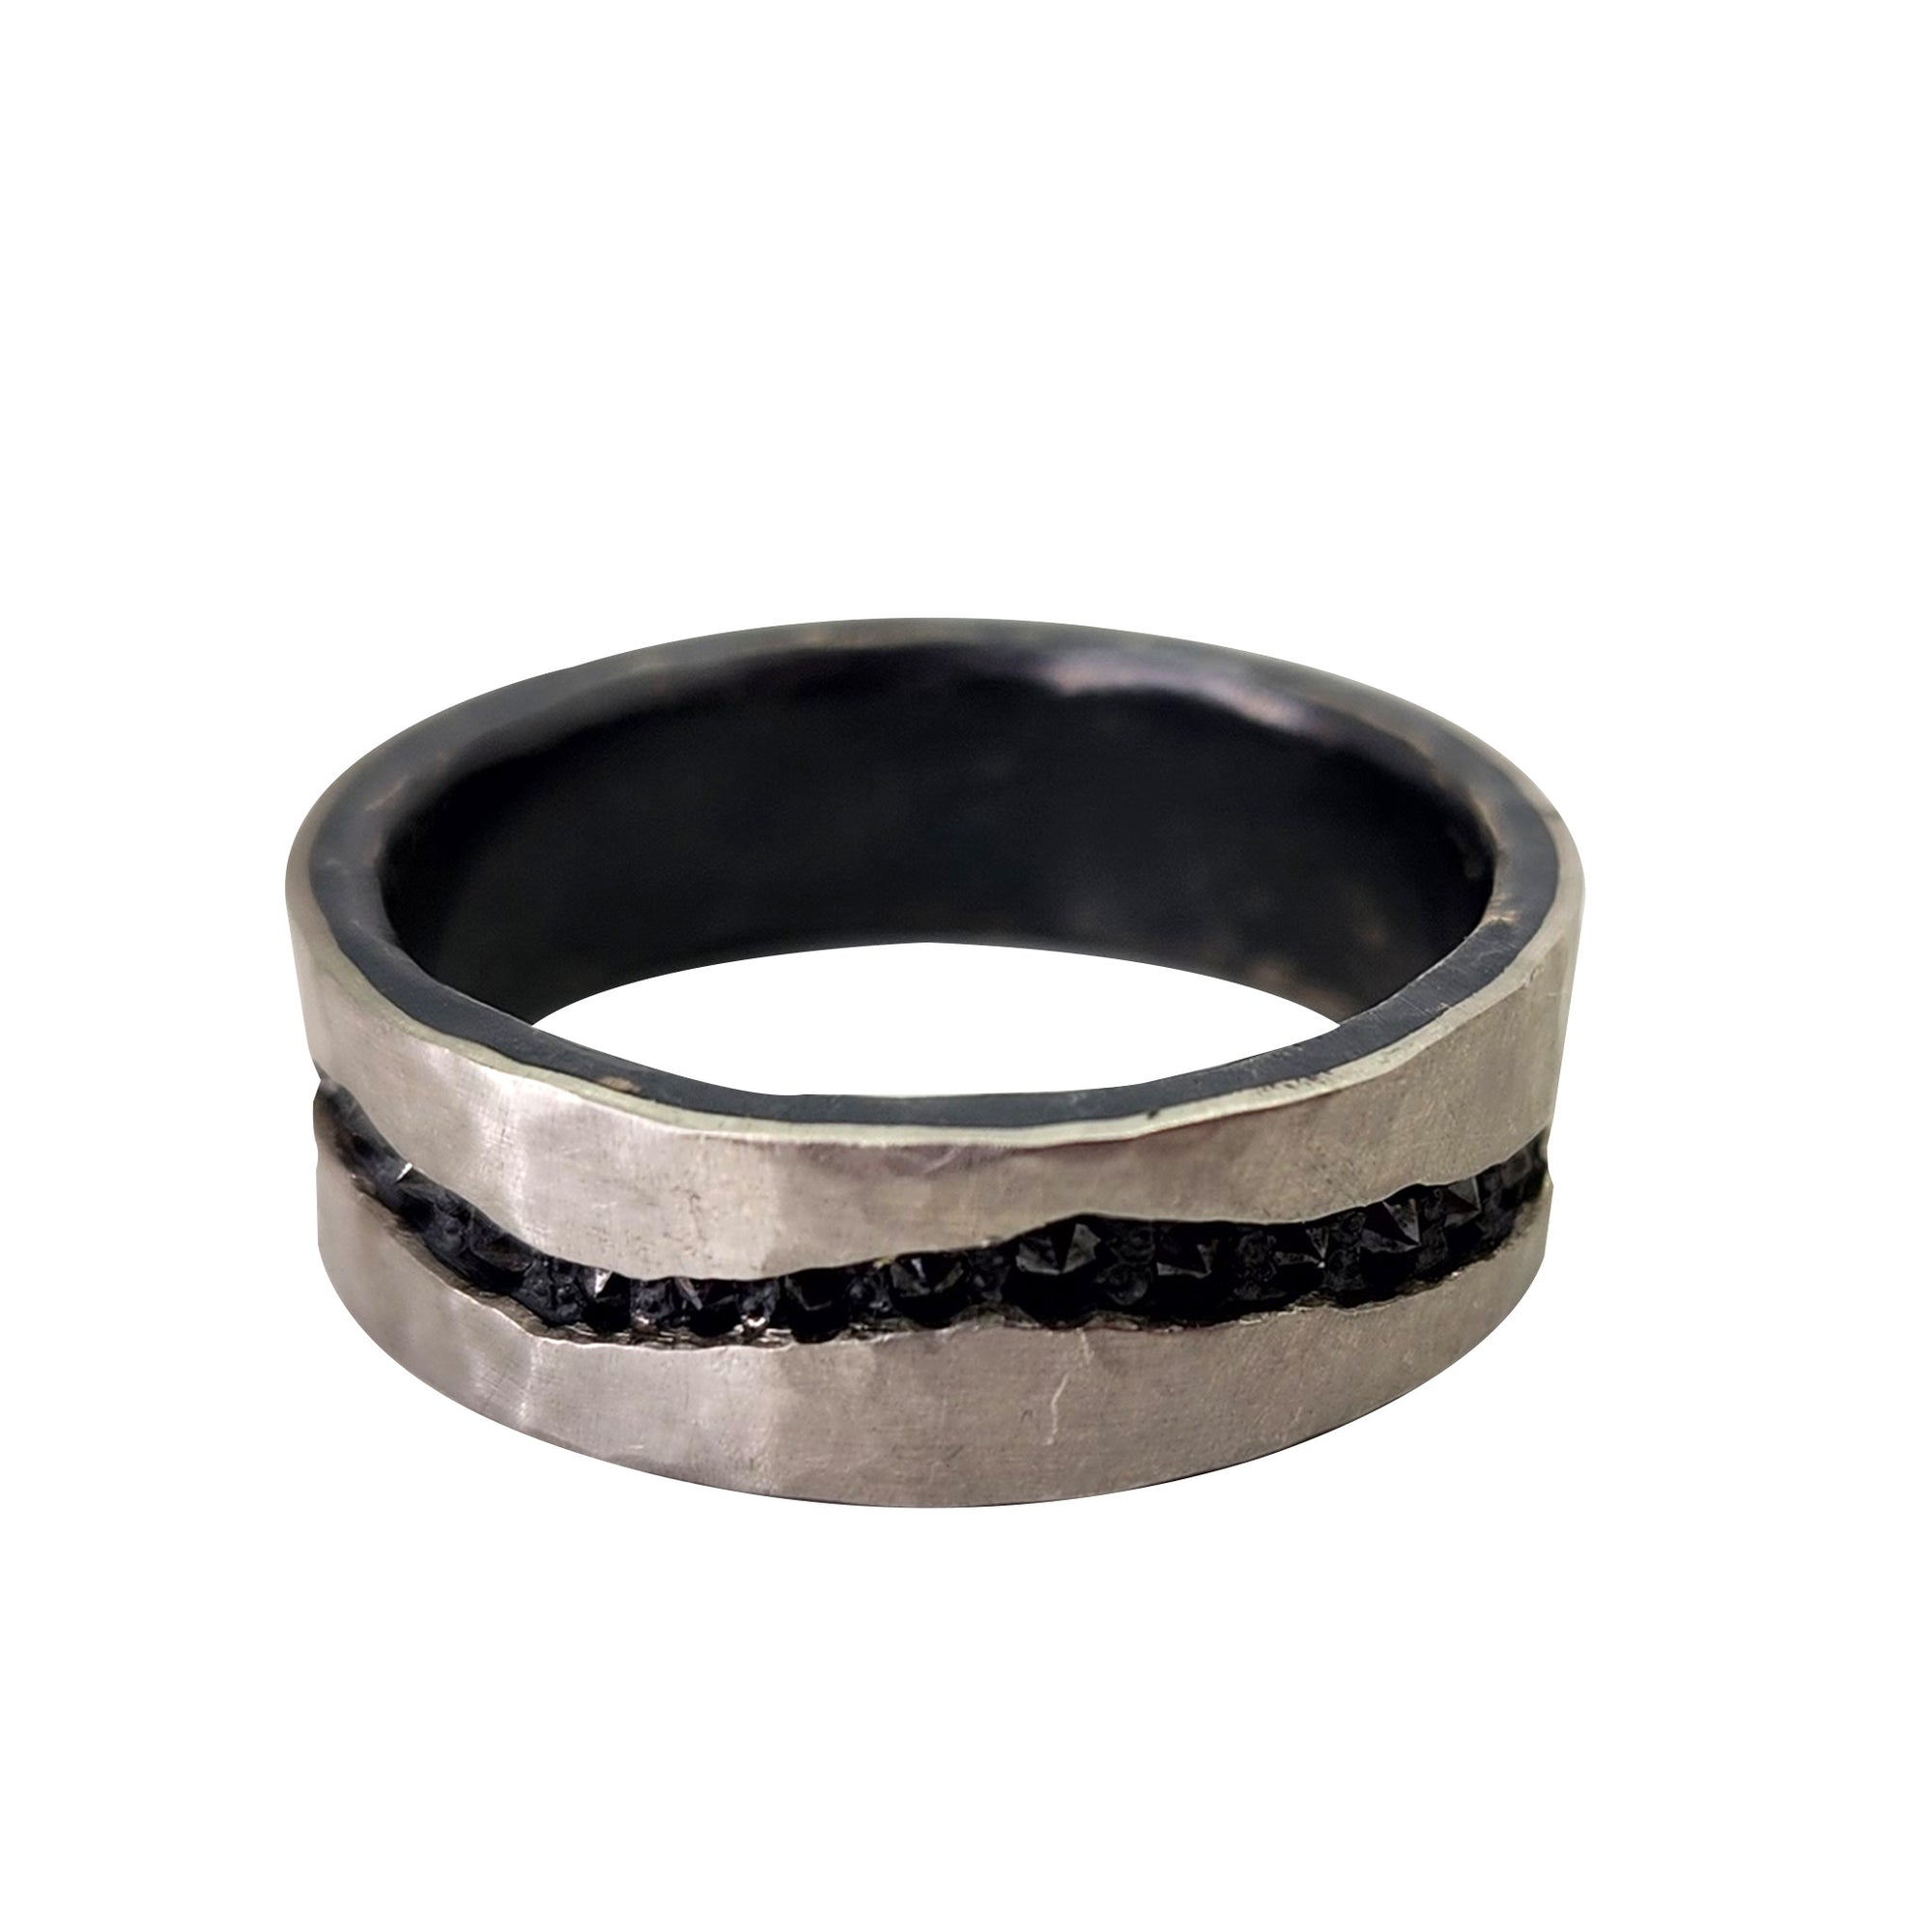 Platinum over a Siver Band with Inverted Black Diamonds